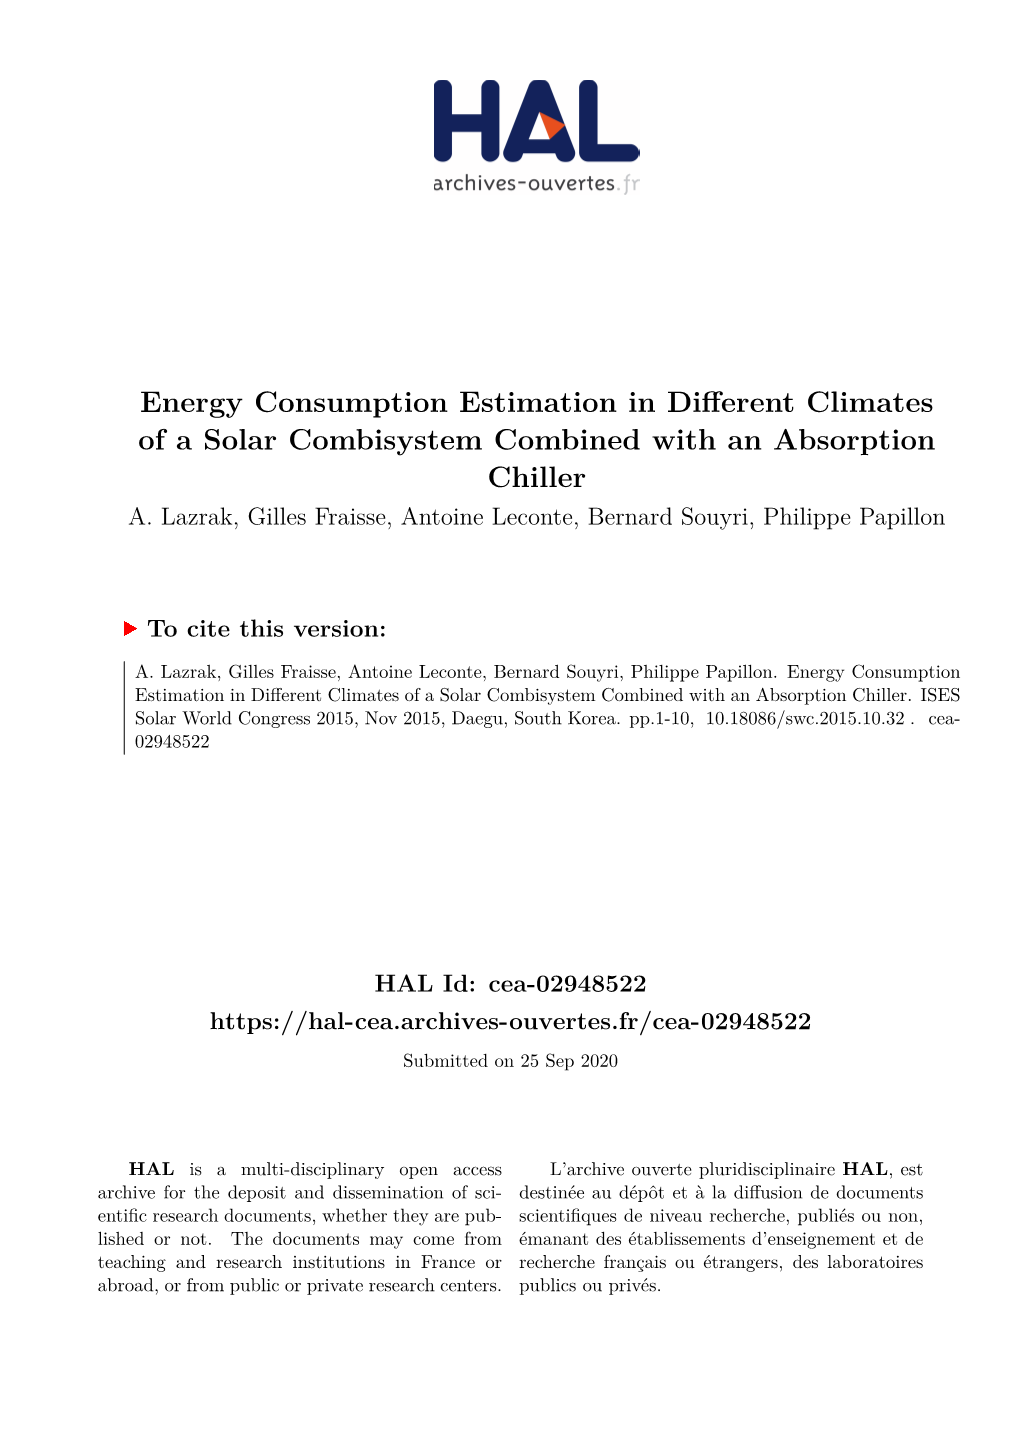 Energy Consumption Estimation in Different Climates of a Solar Combisystem Combined with an Absorption Chiller A